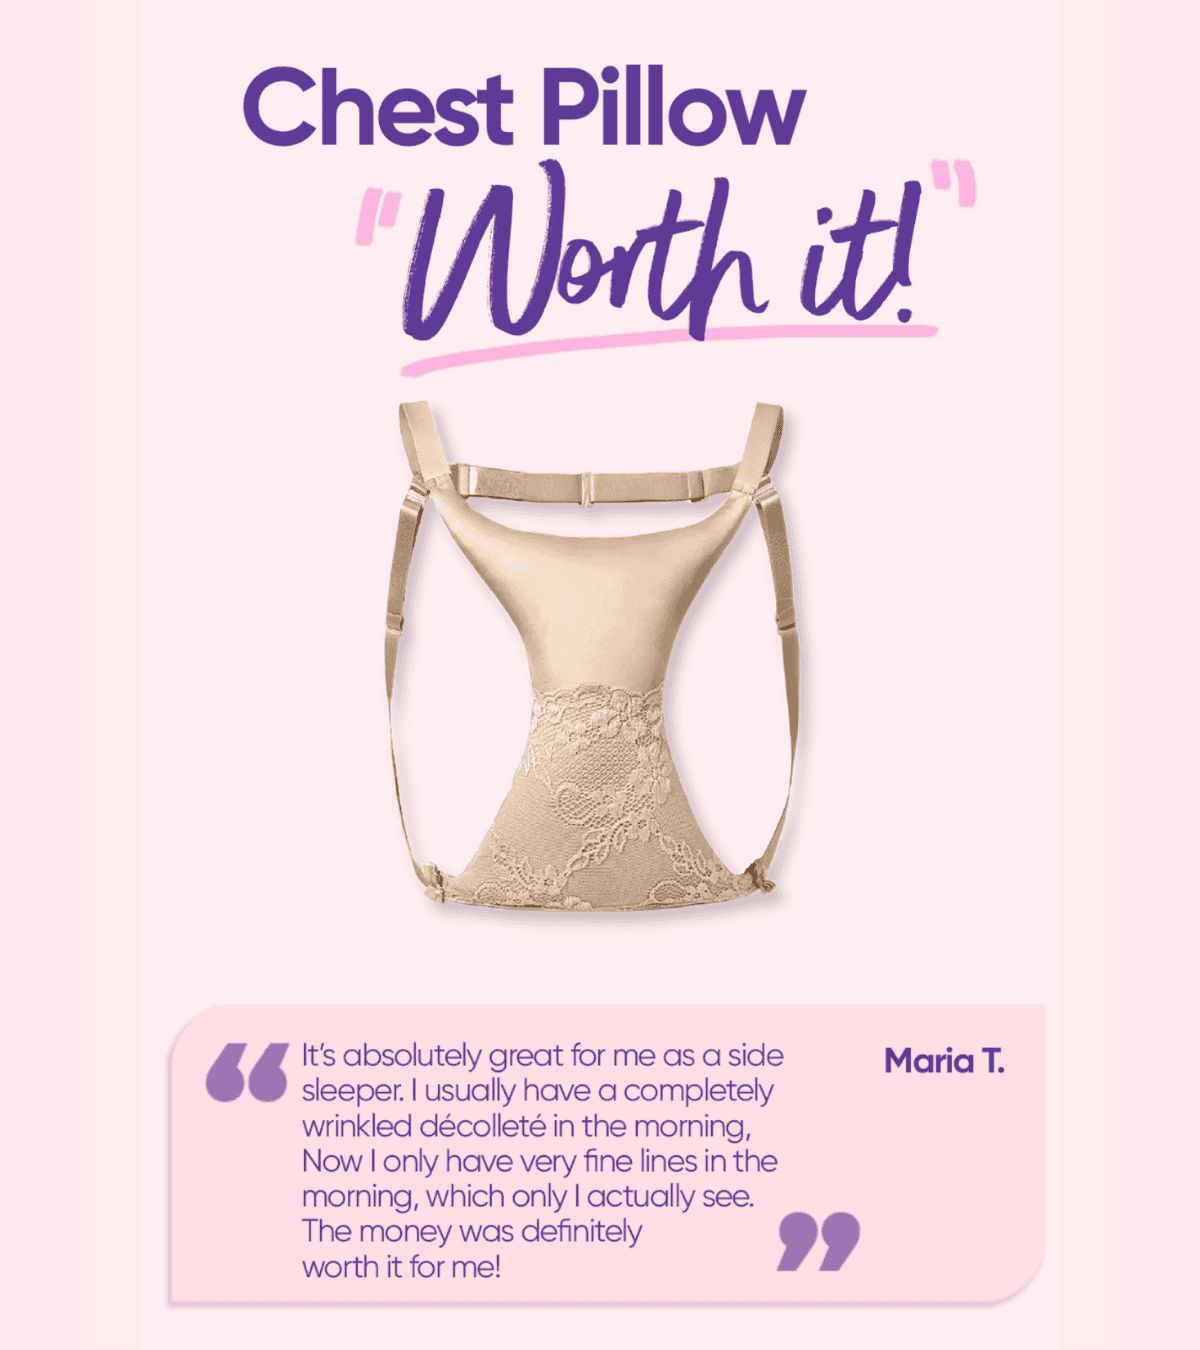 Chest Pillow for Wrinkle Prevention